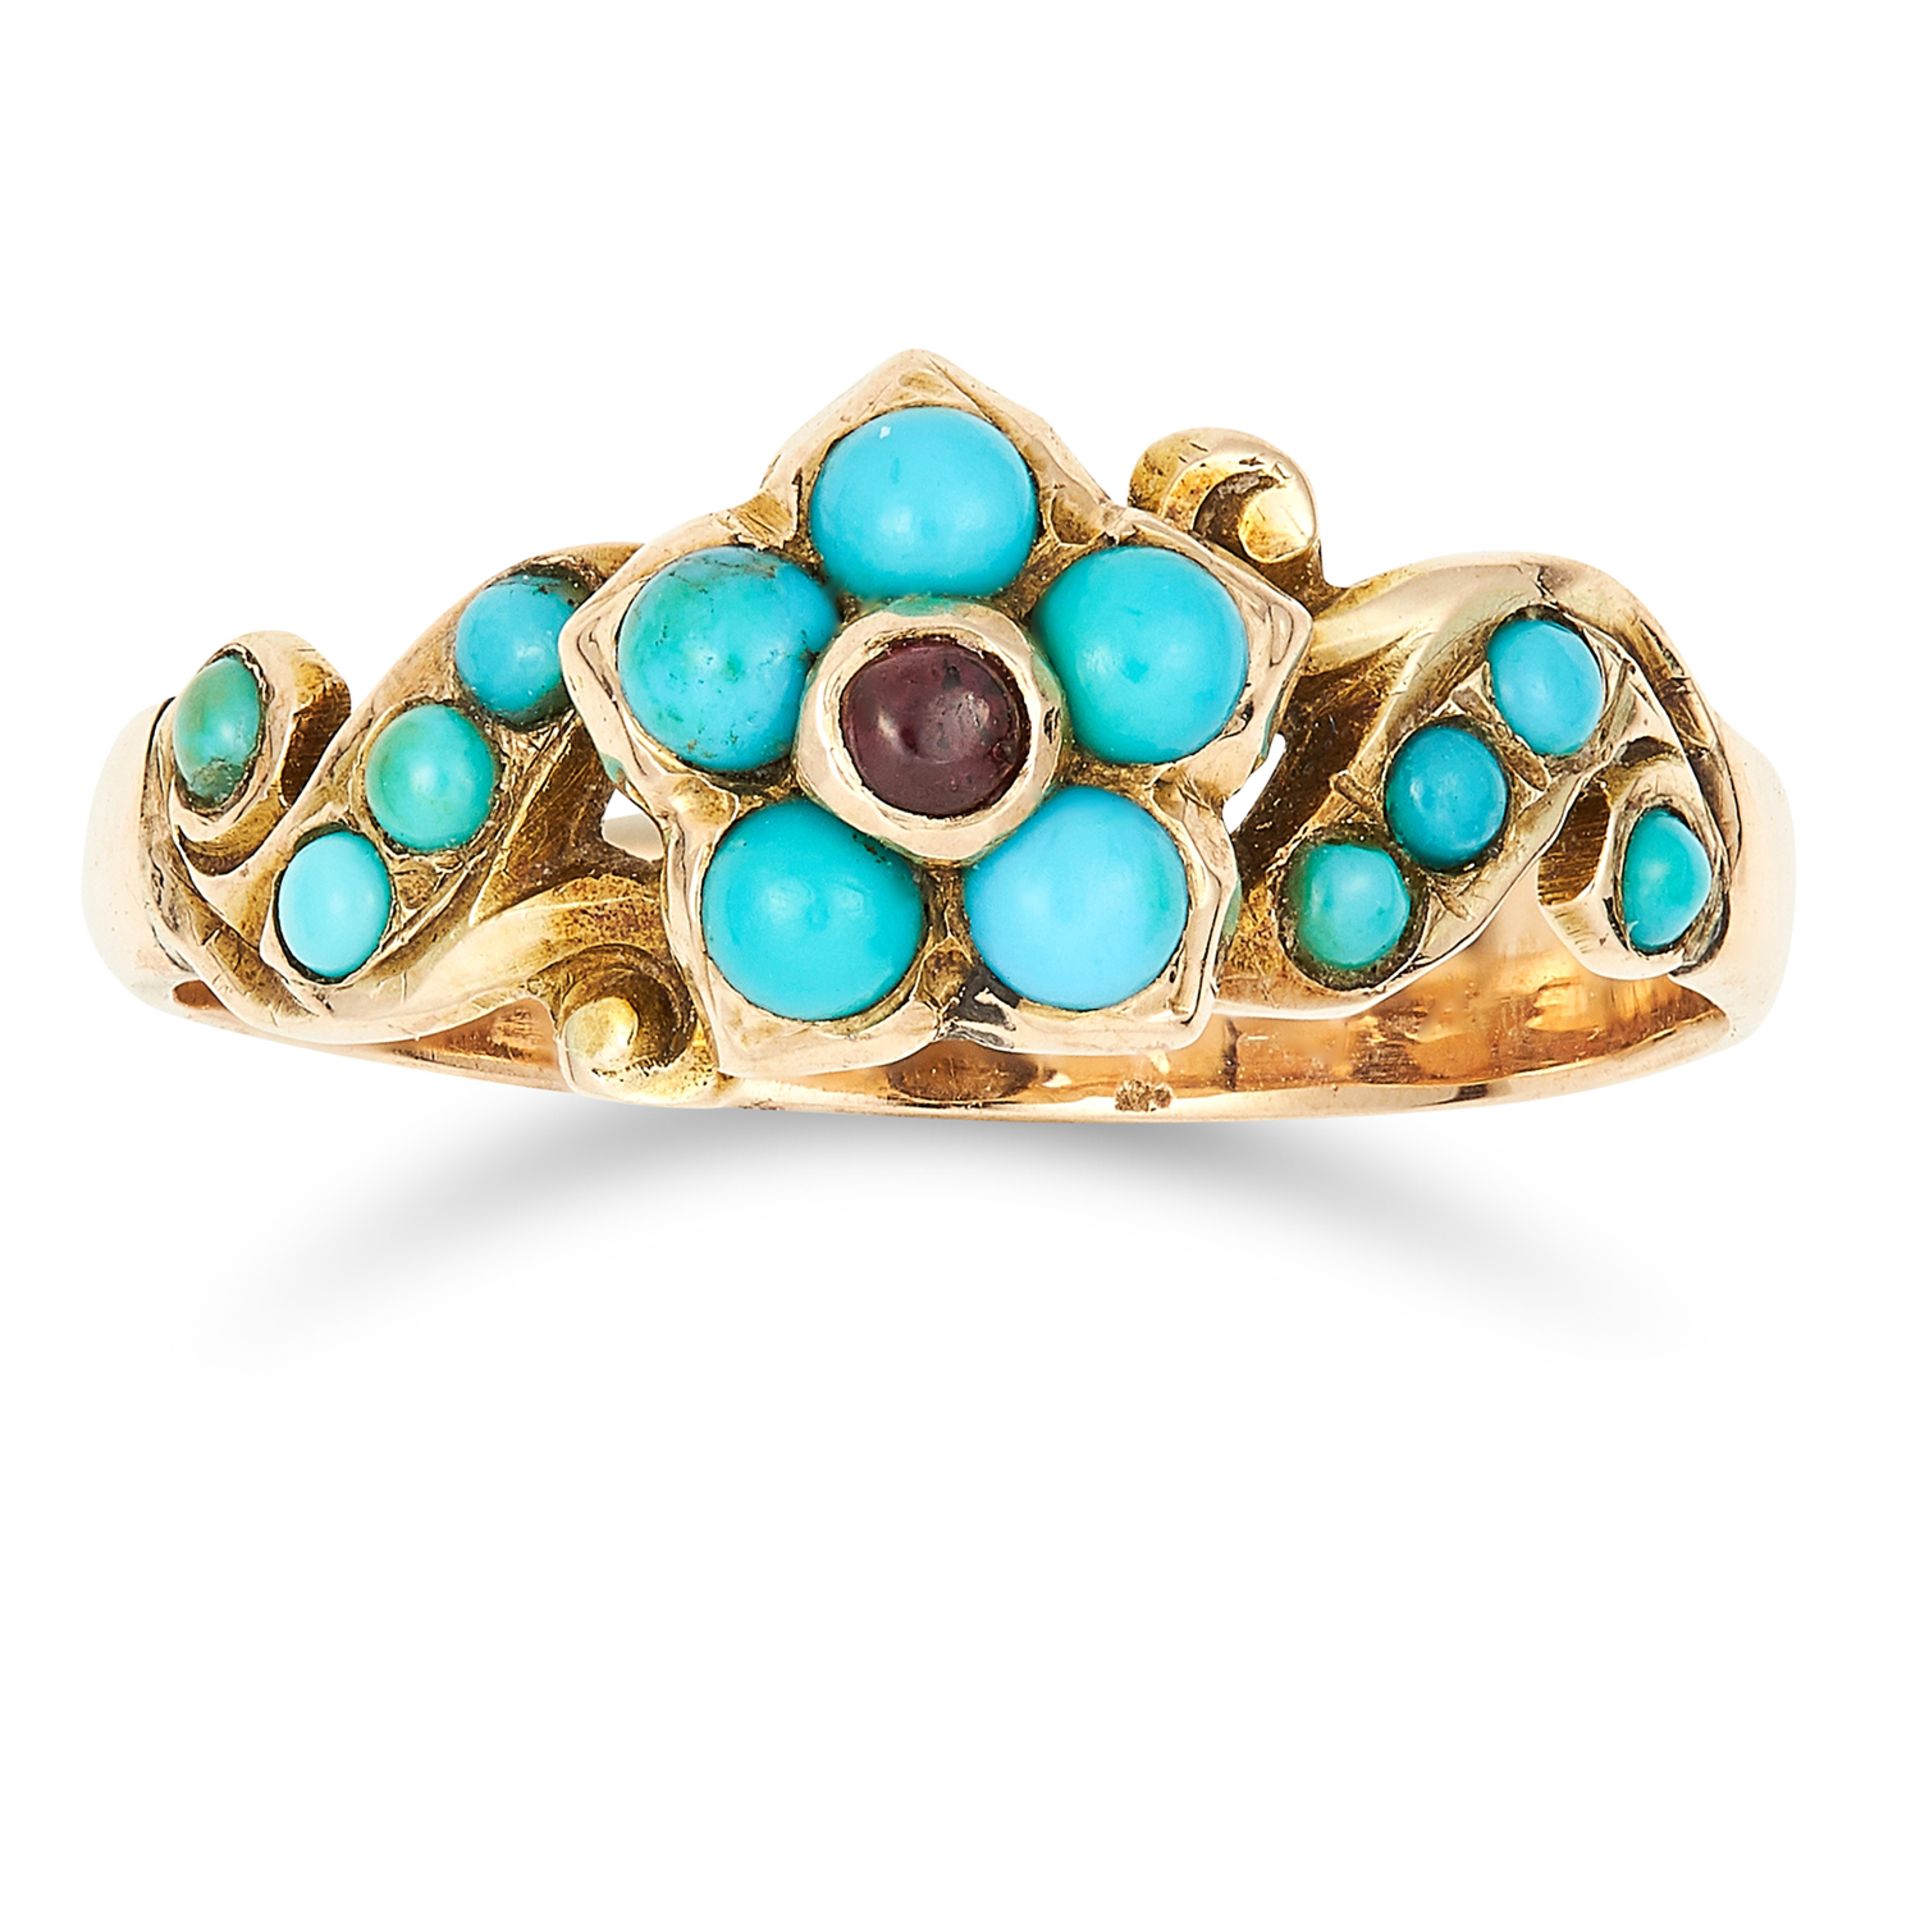 ANTIQUE VICTORIAN TURQUOISE AND GARNET RING in high carat yellow gold, set with cabochon turquoise